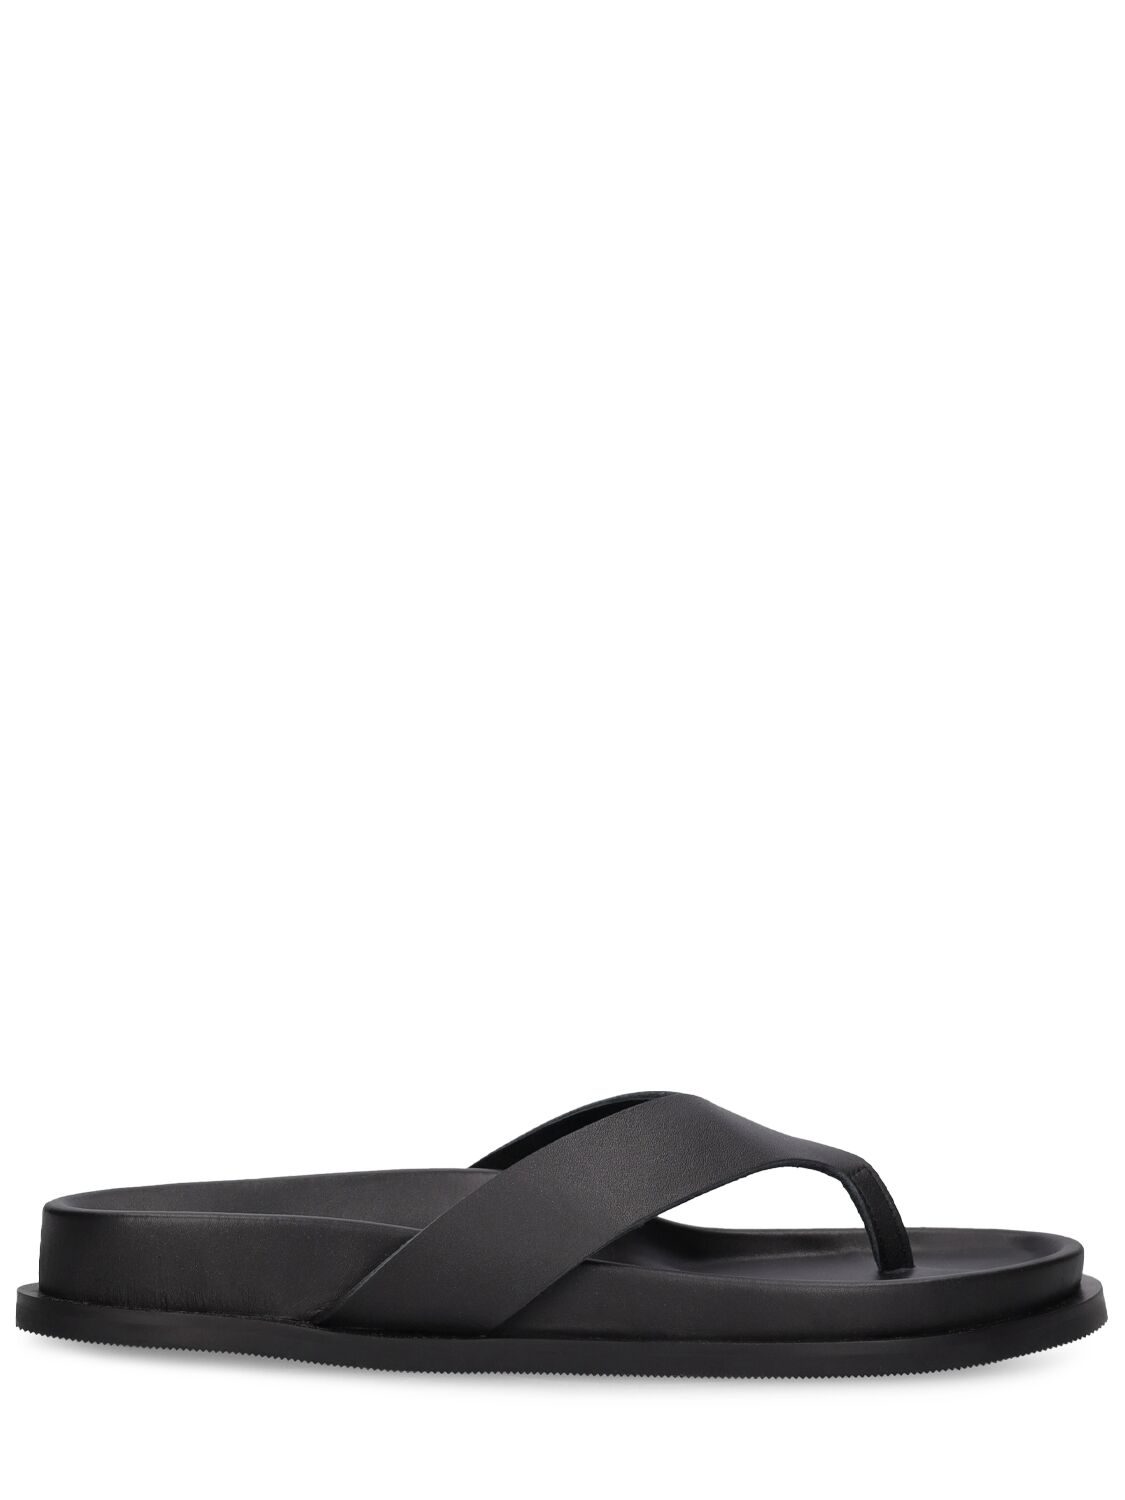 St.agni 30mm Leather Thong Flat Sandals In Black